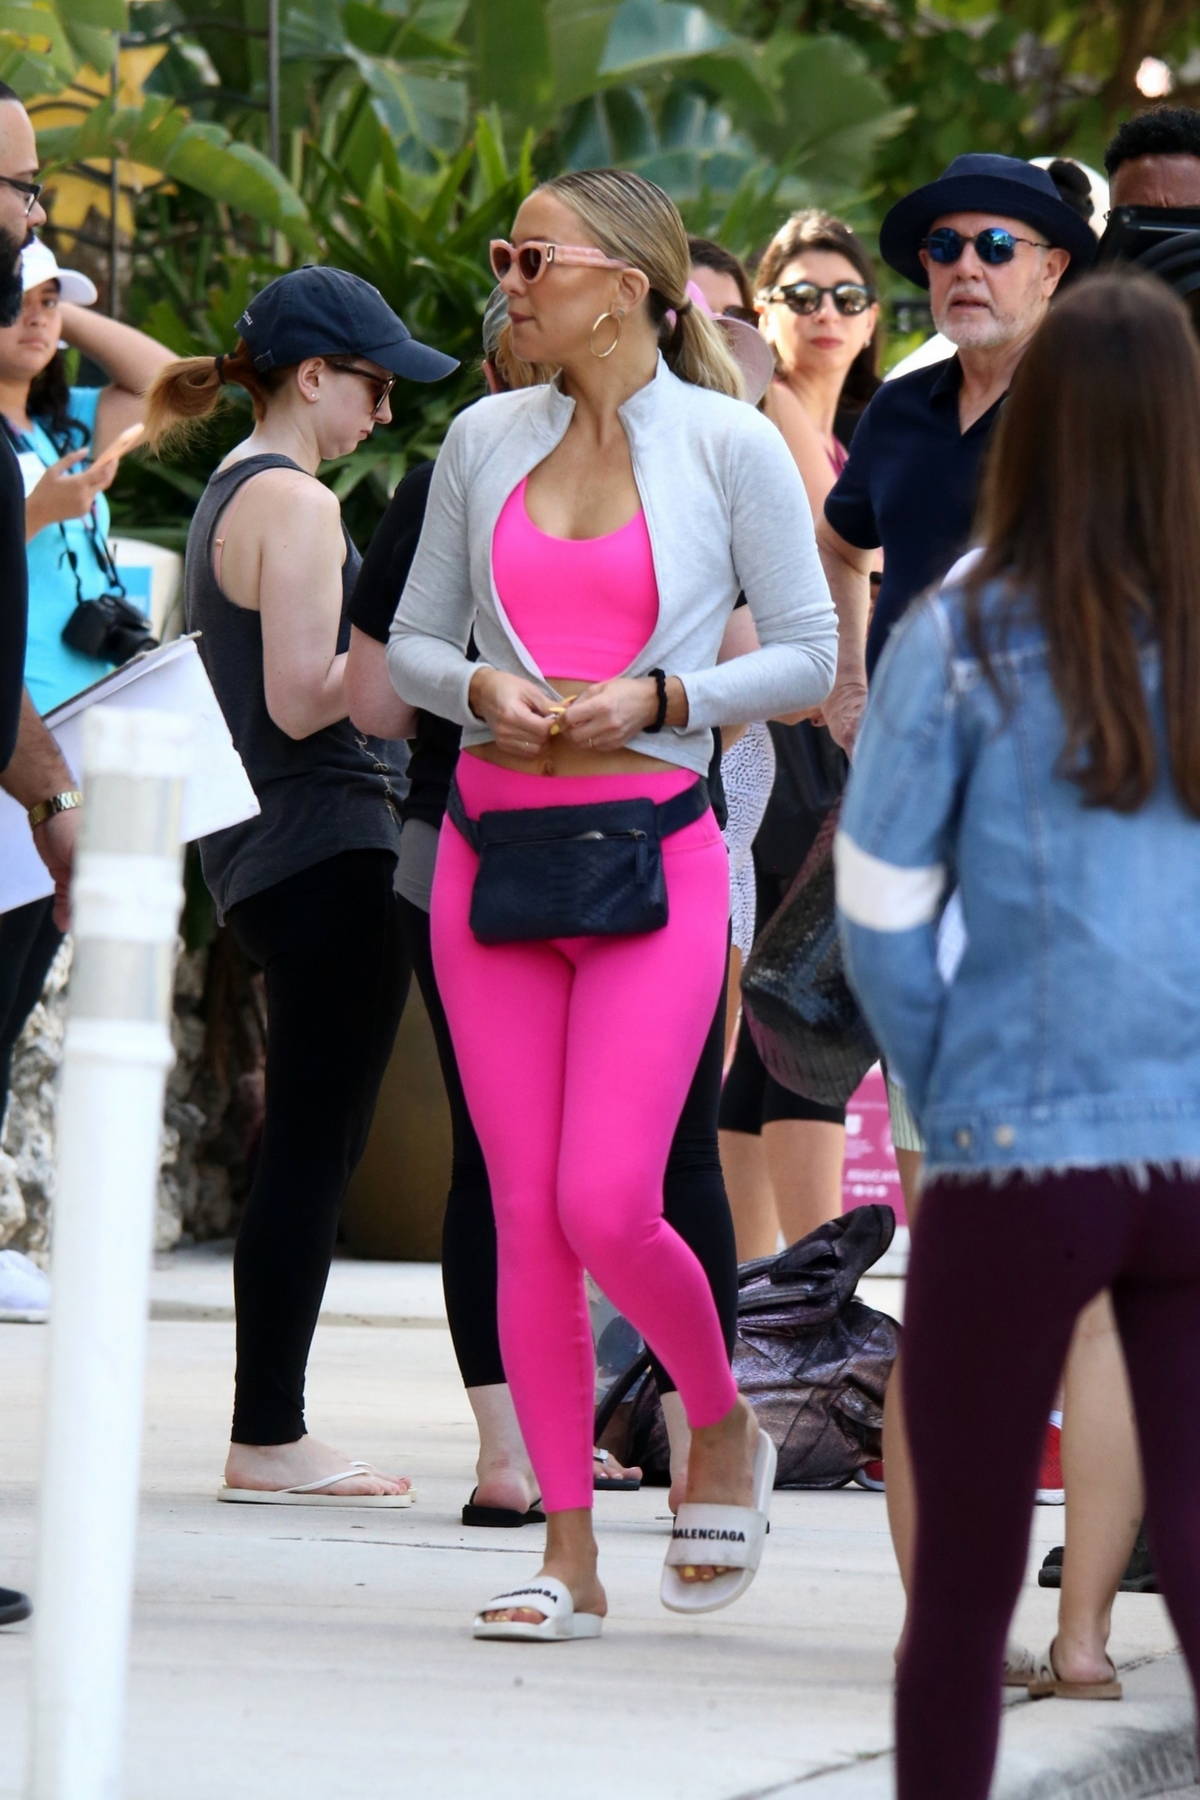 https://www.celebsfirst.com/wp-content/uploads/2022/03/kate-hudson-stands-out-in-hot-pink-crop-top-and-leggings-while-attending-a-yoga-event-at-nikki-beach-in-miami-florida-270222_1.jpg